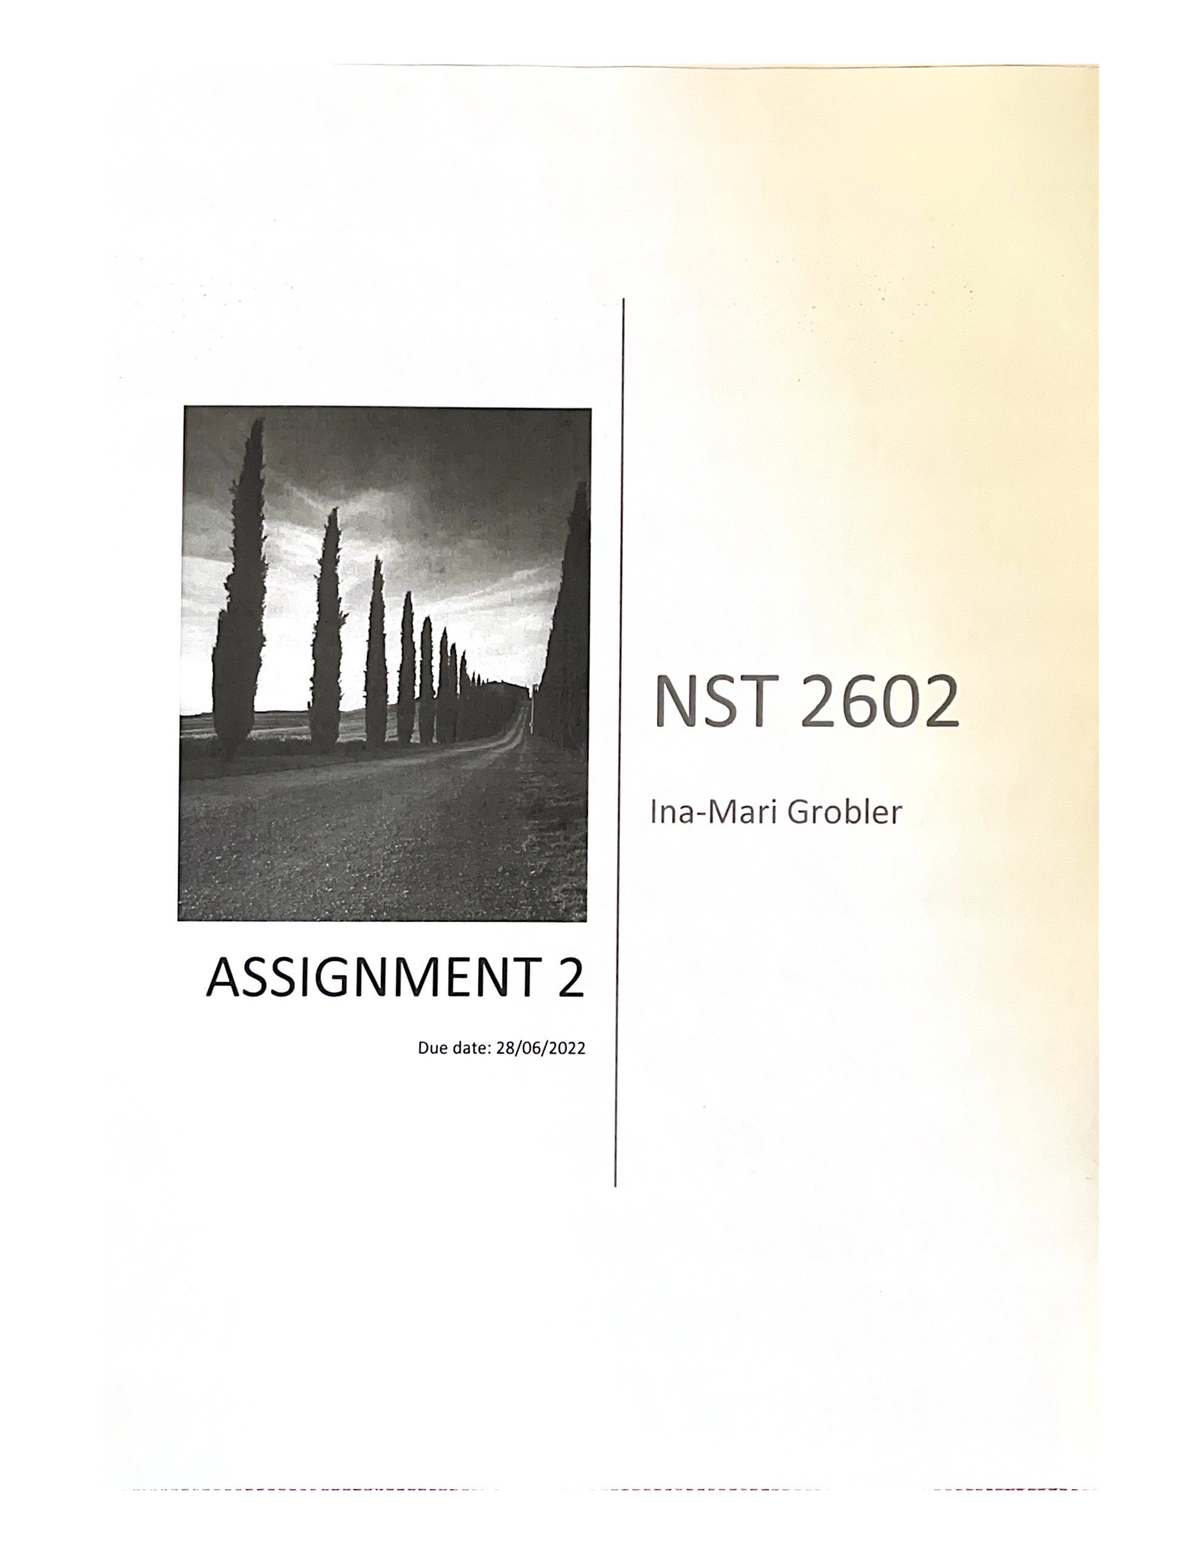 nst2602 assignment 4 answers